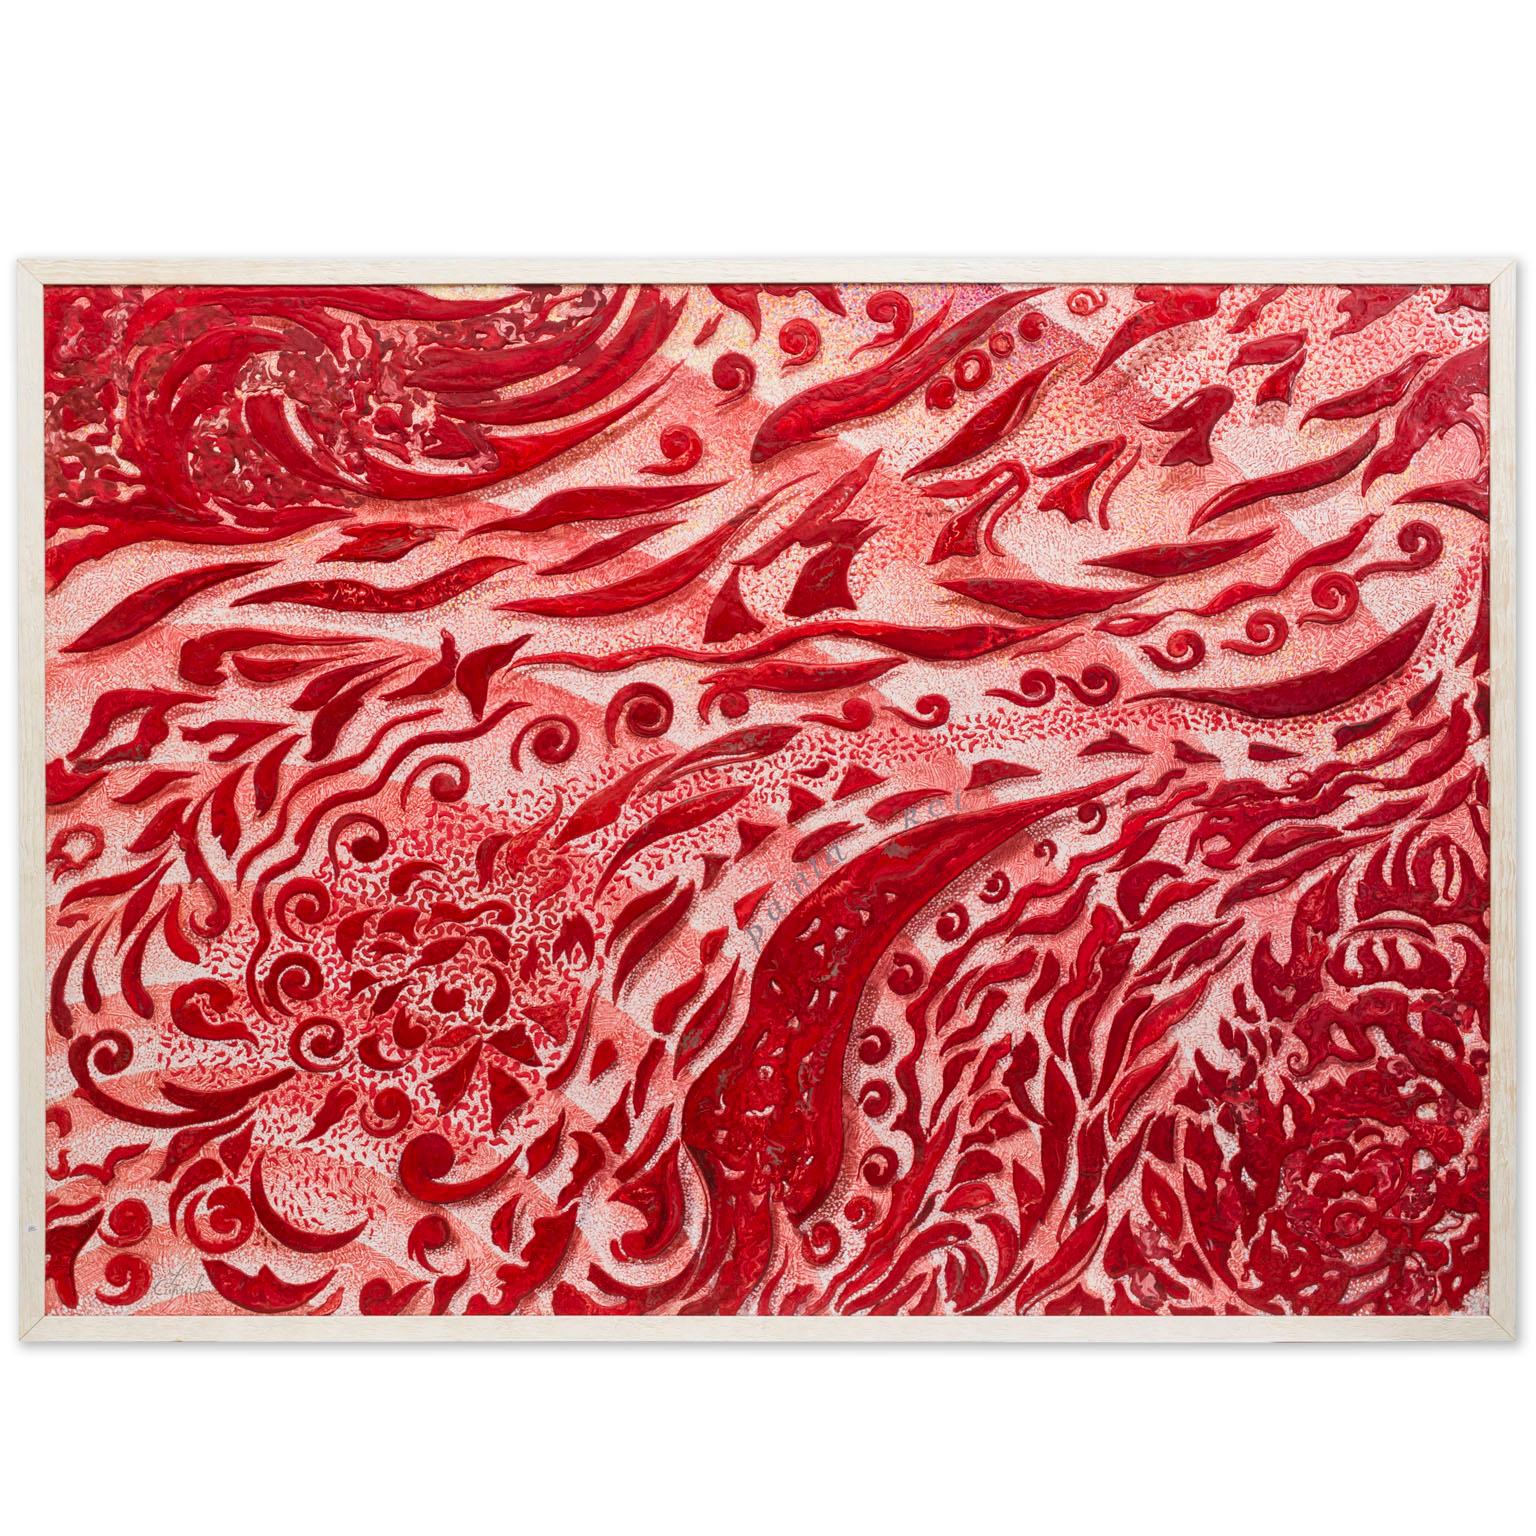 Artwork handmade wall panel red relief decor made in Italy by Cupioli available For Sale